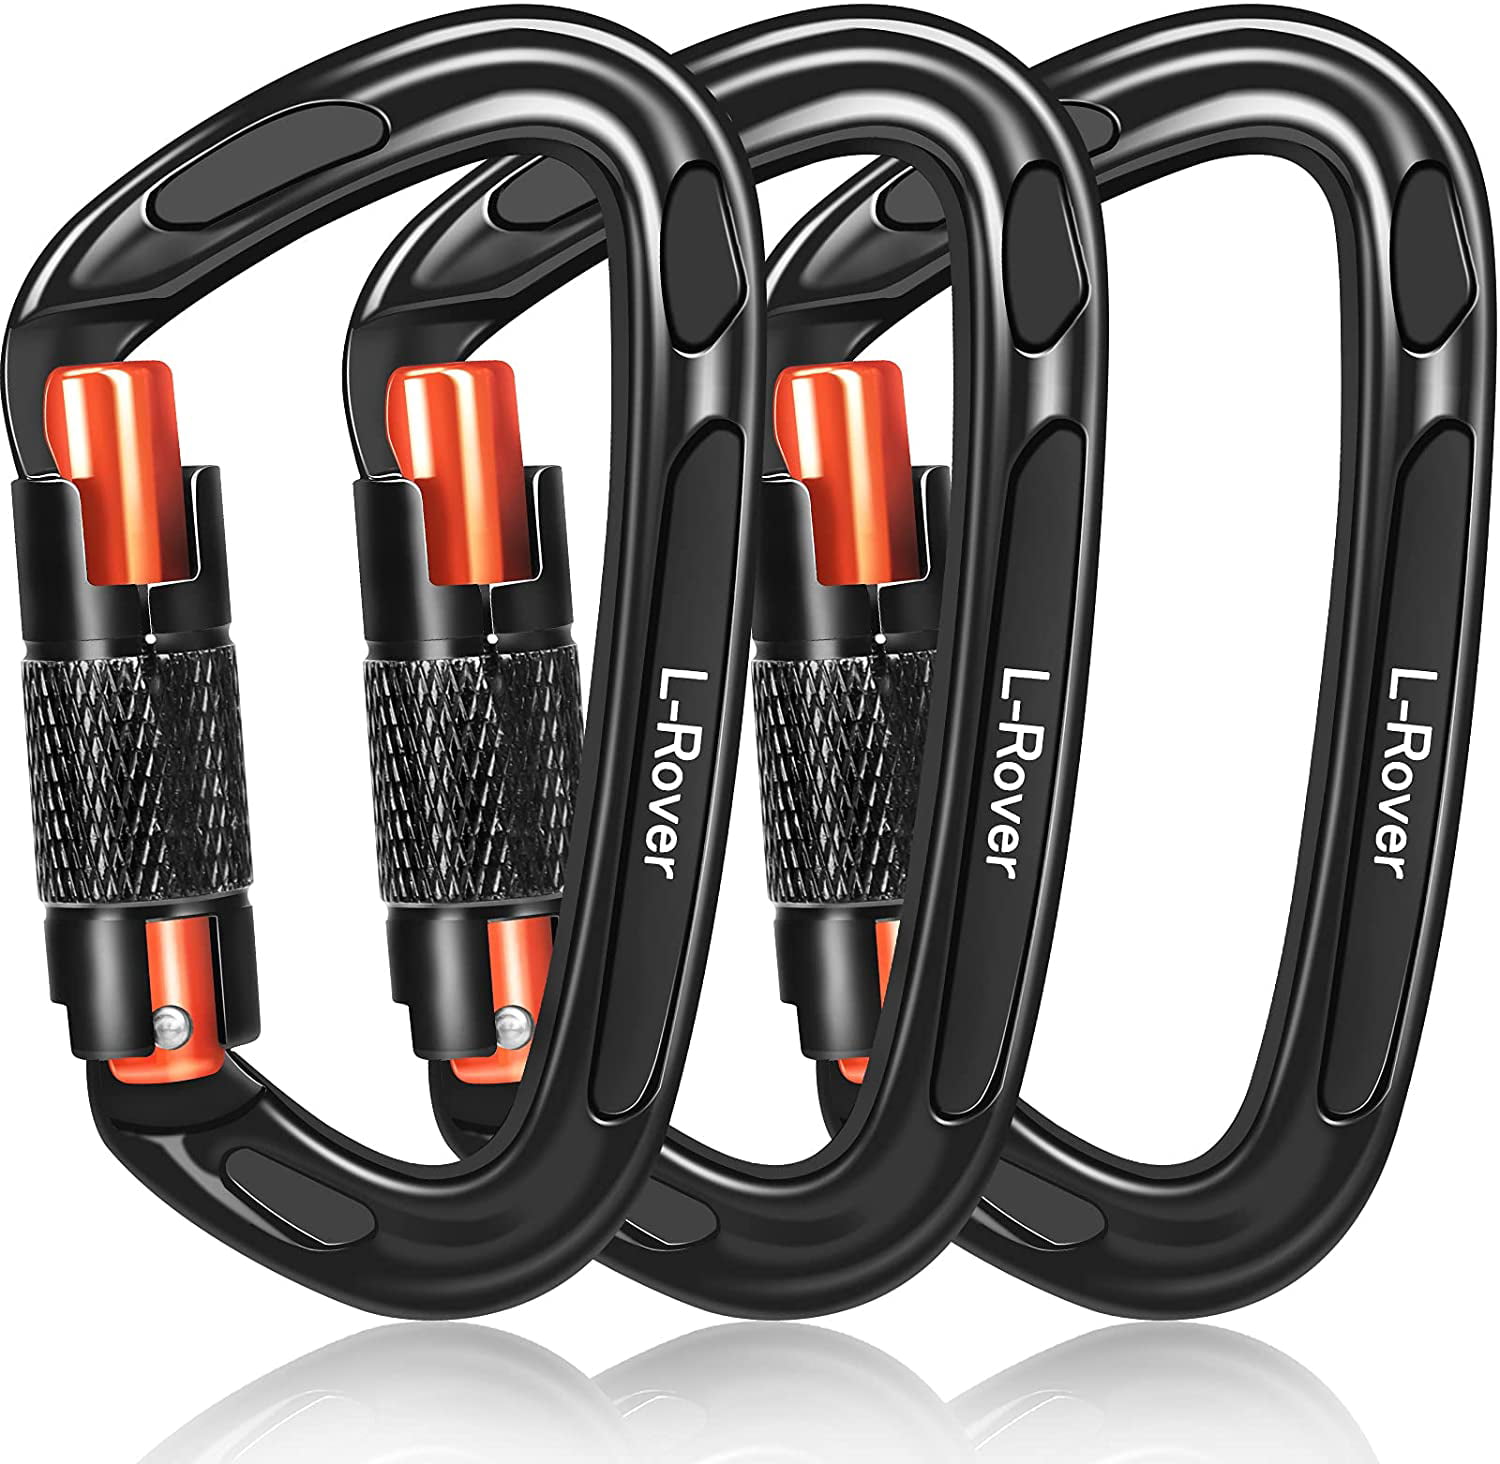 Details about   5 Pack Climbing Carabiner Lock Caribeaners Outdoor Equipment Rope Hook Dog Leash 